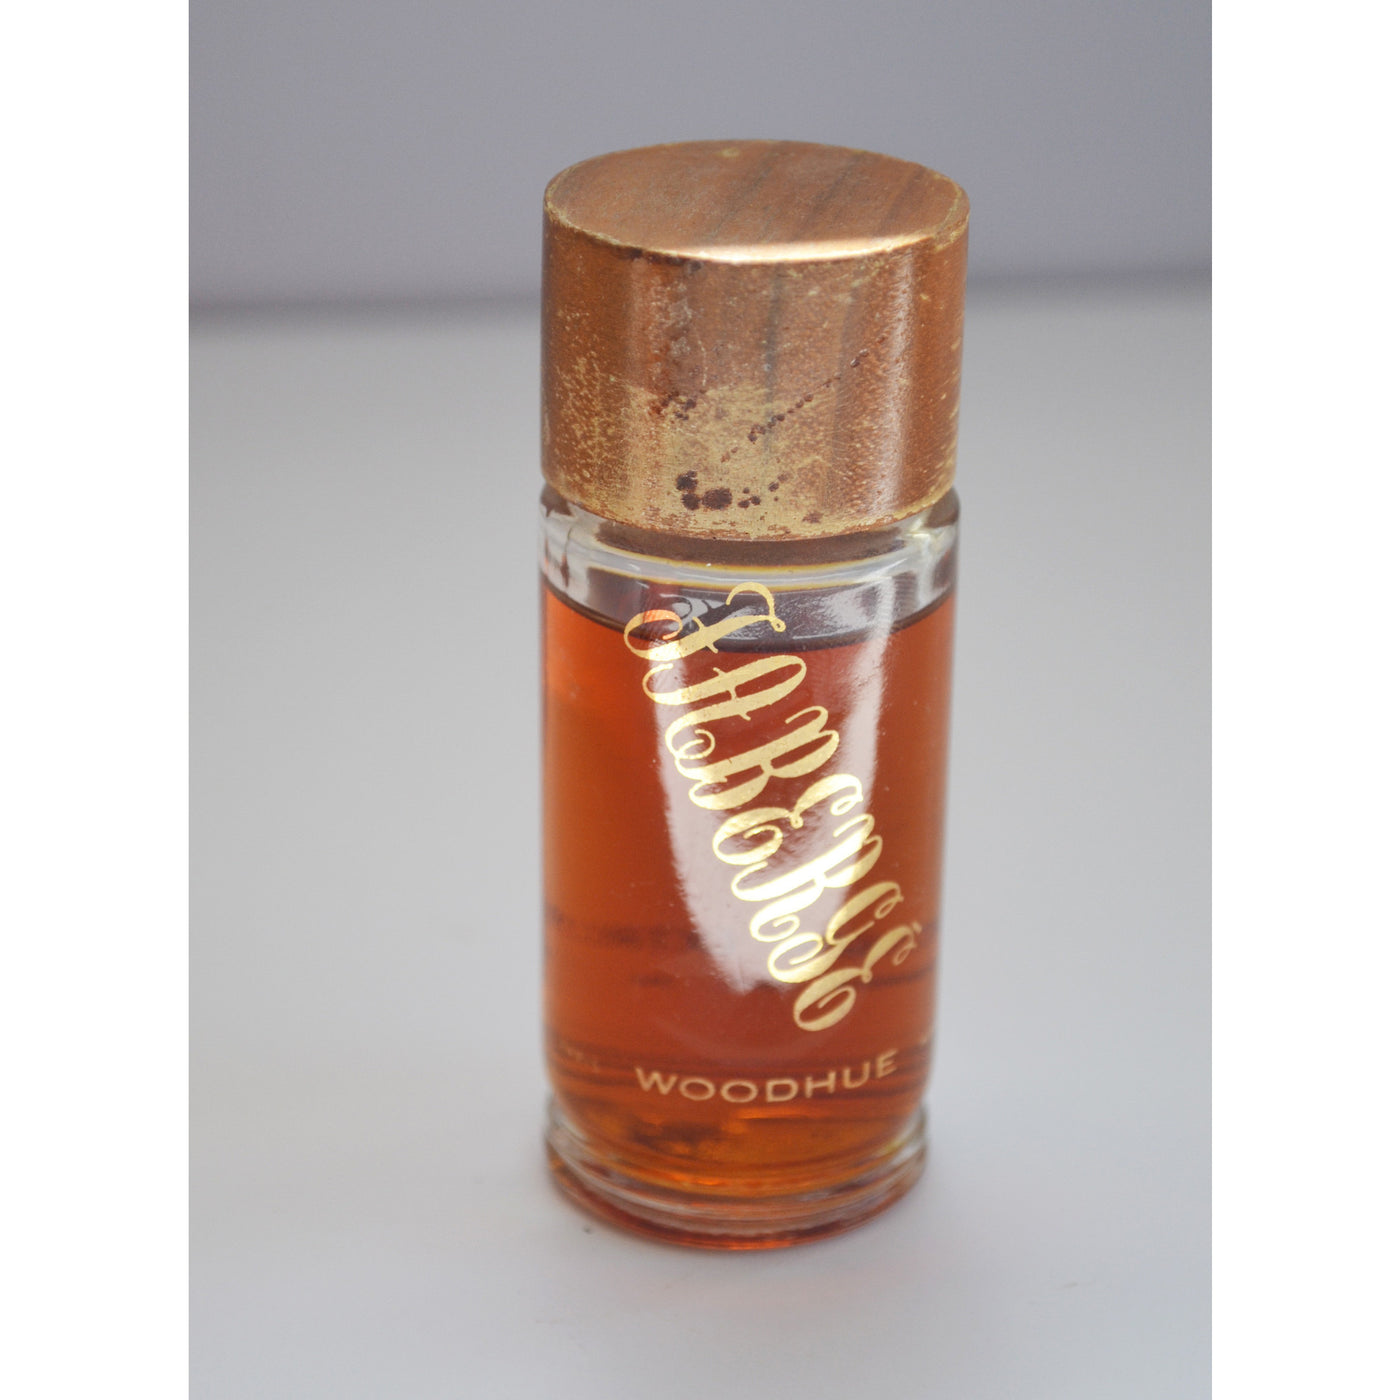 Vintage Woodhue Cologne By Faberge 